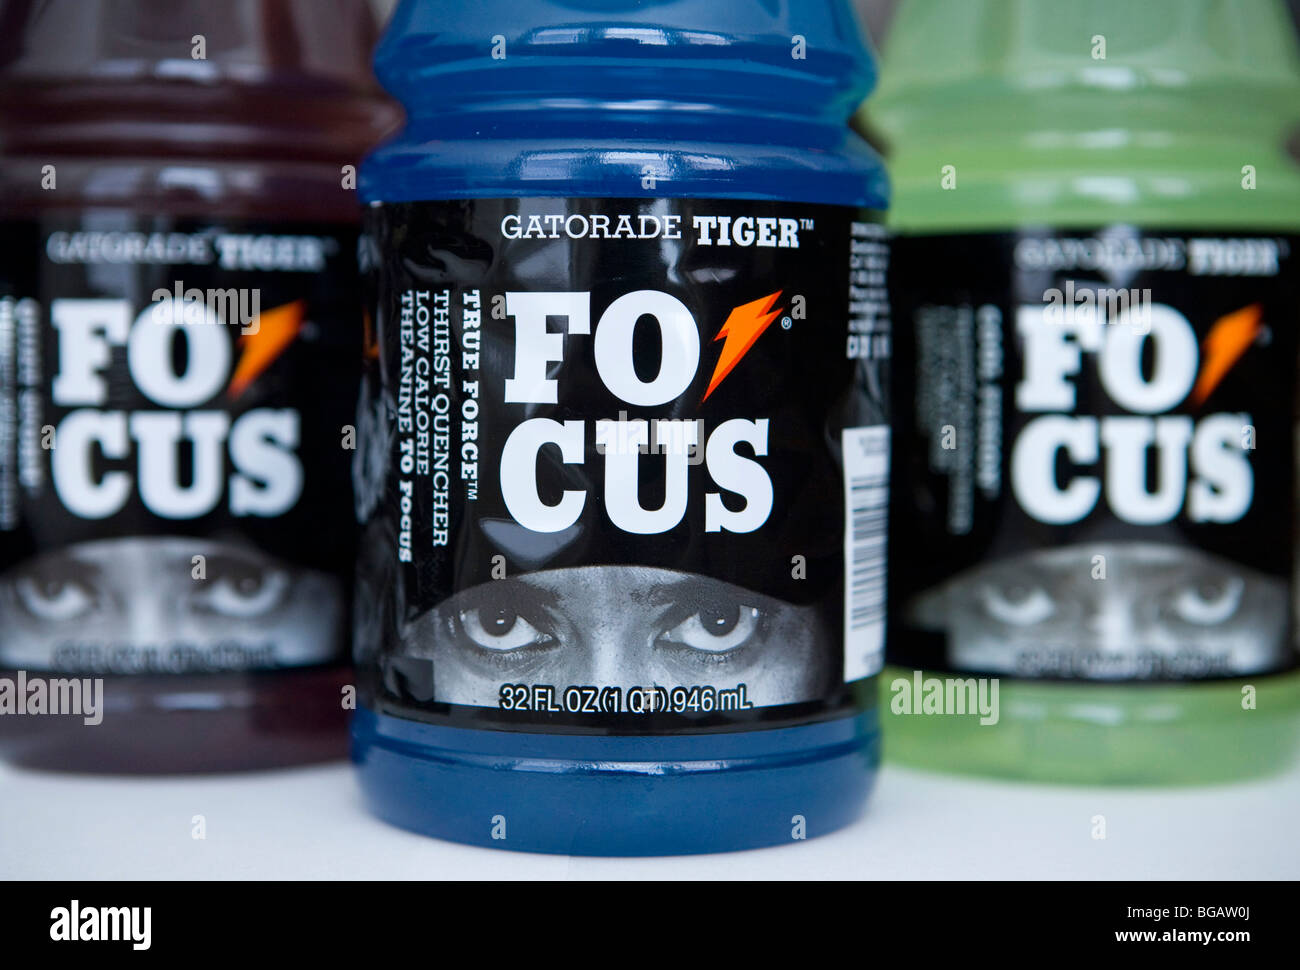 Bottles of the now discontinued Tiger Woods Gatorade drink.  Stock Photo